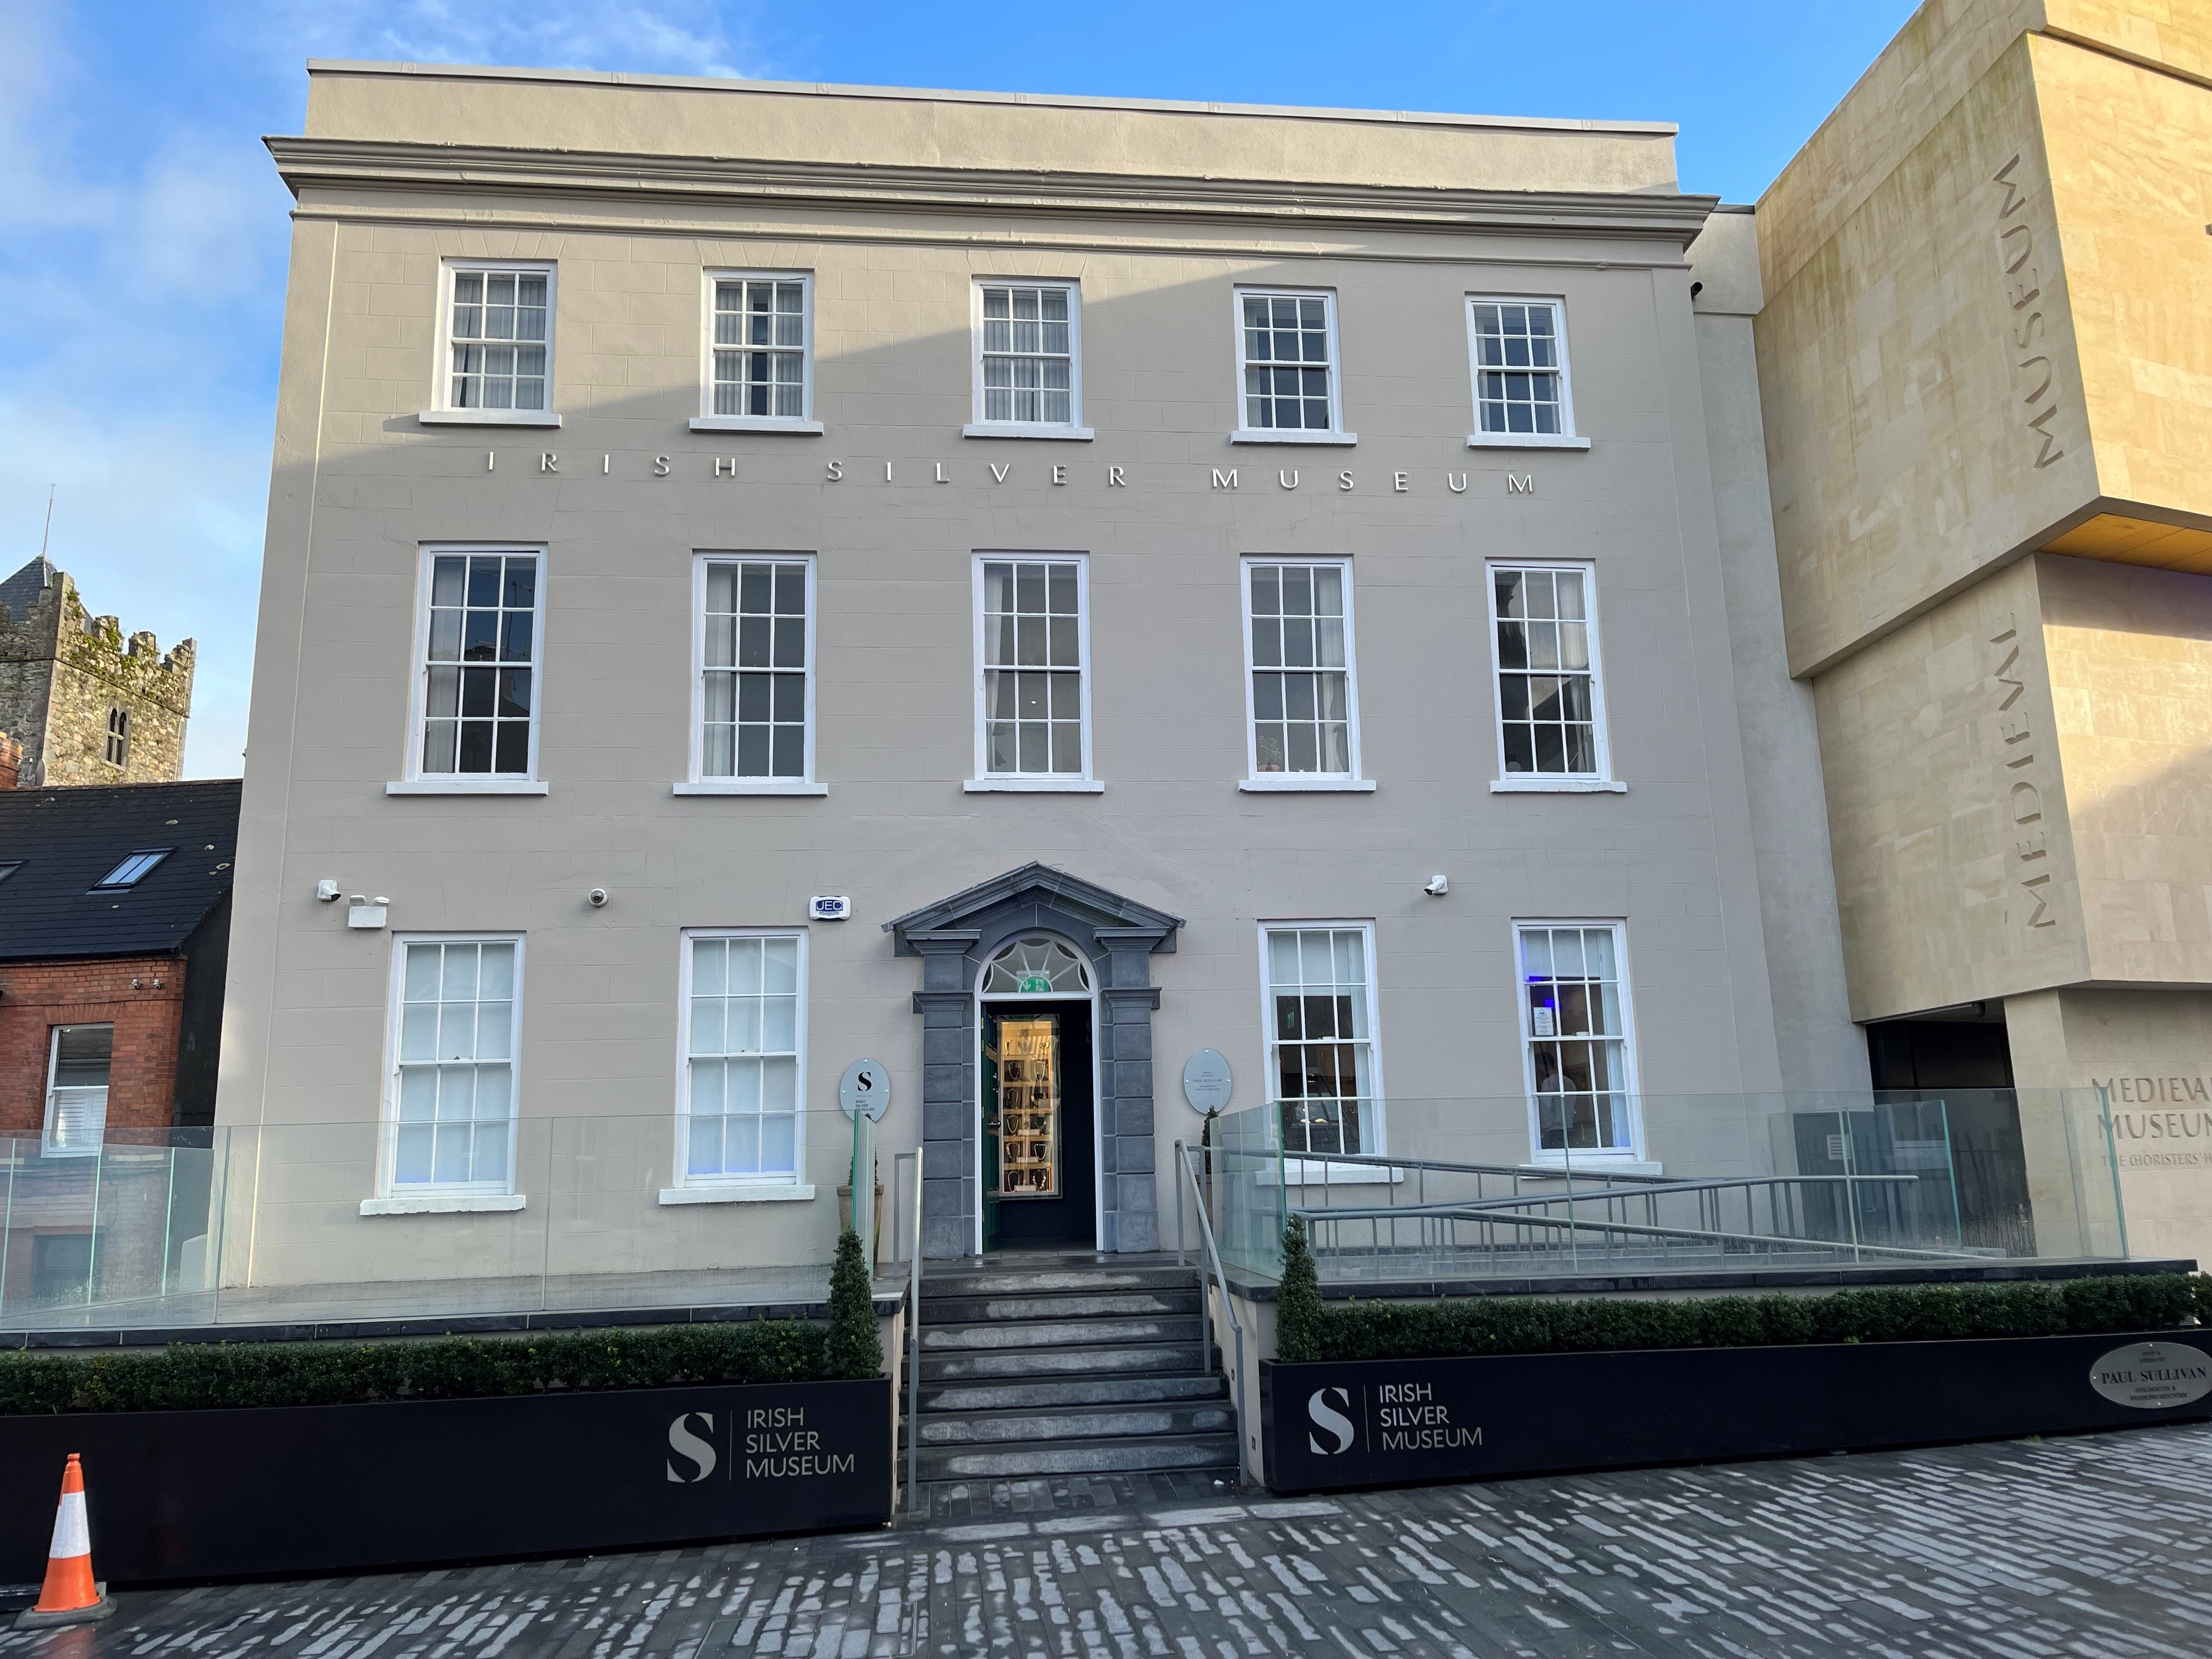 M&E Contract Completed for The Irish Silver Museum Waterford